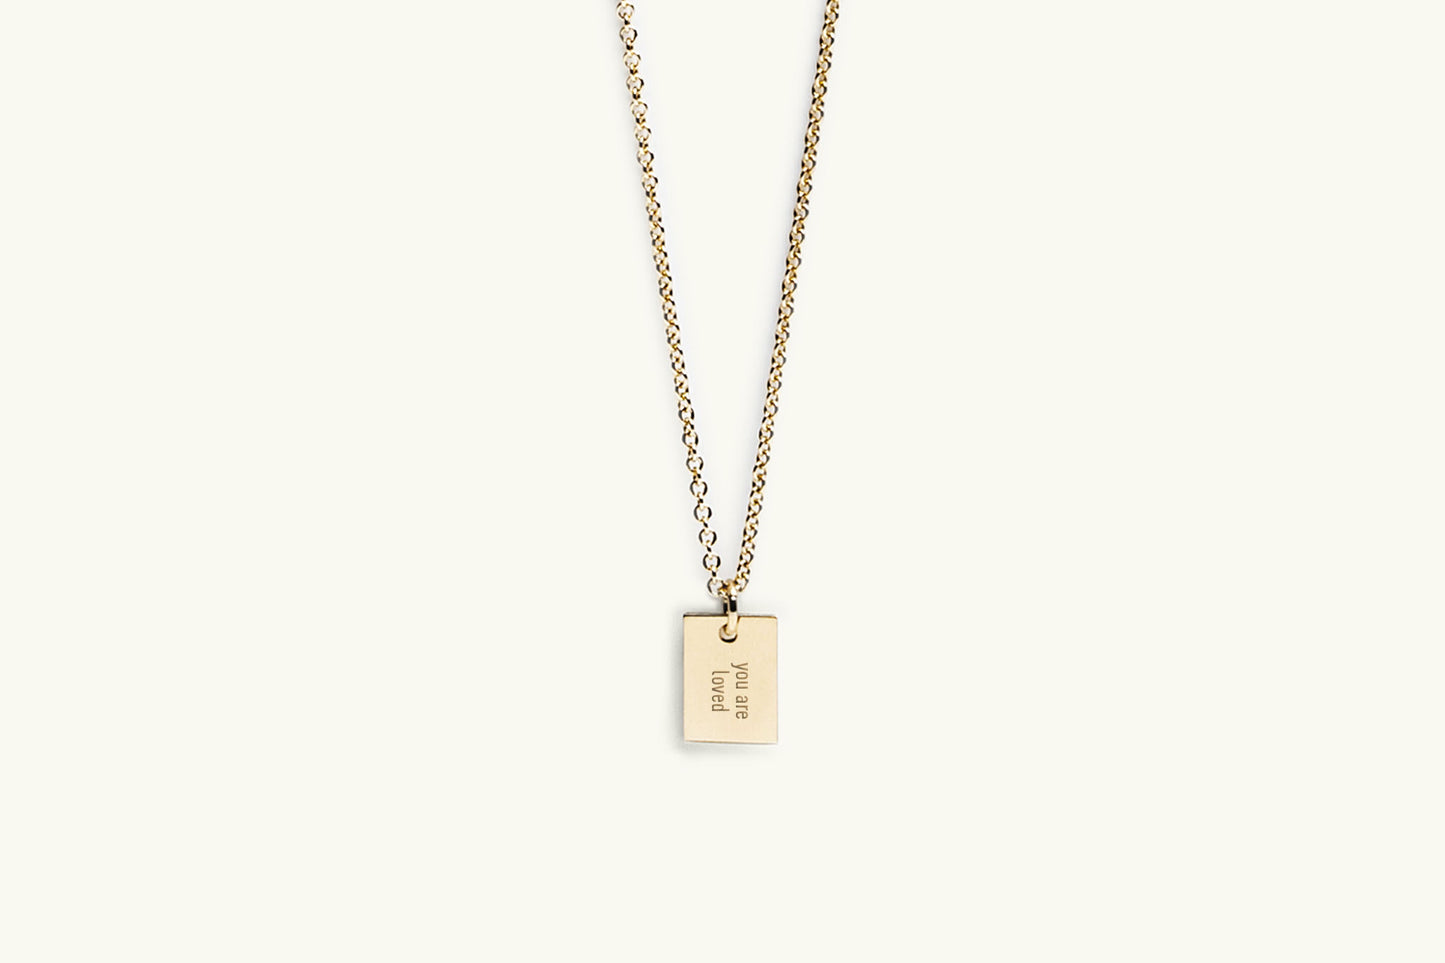 Say Anything Message Charm Necklace